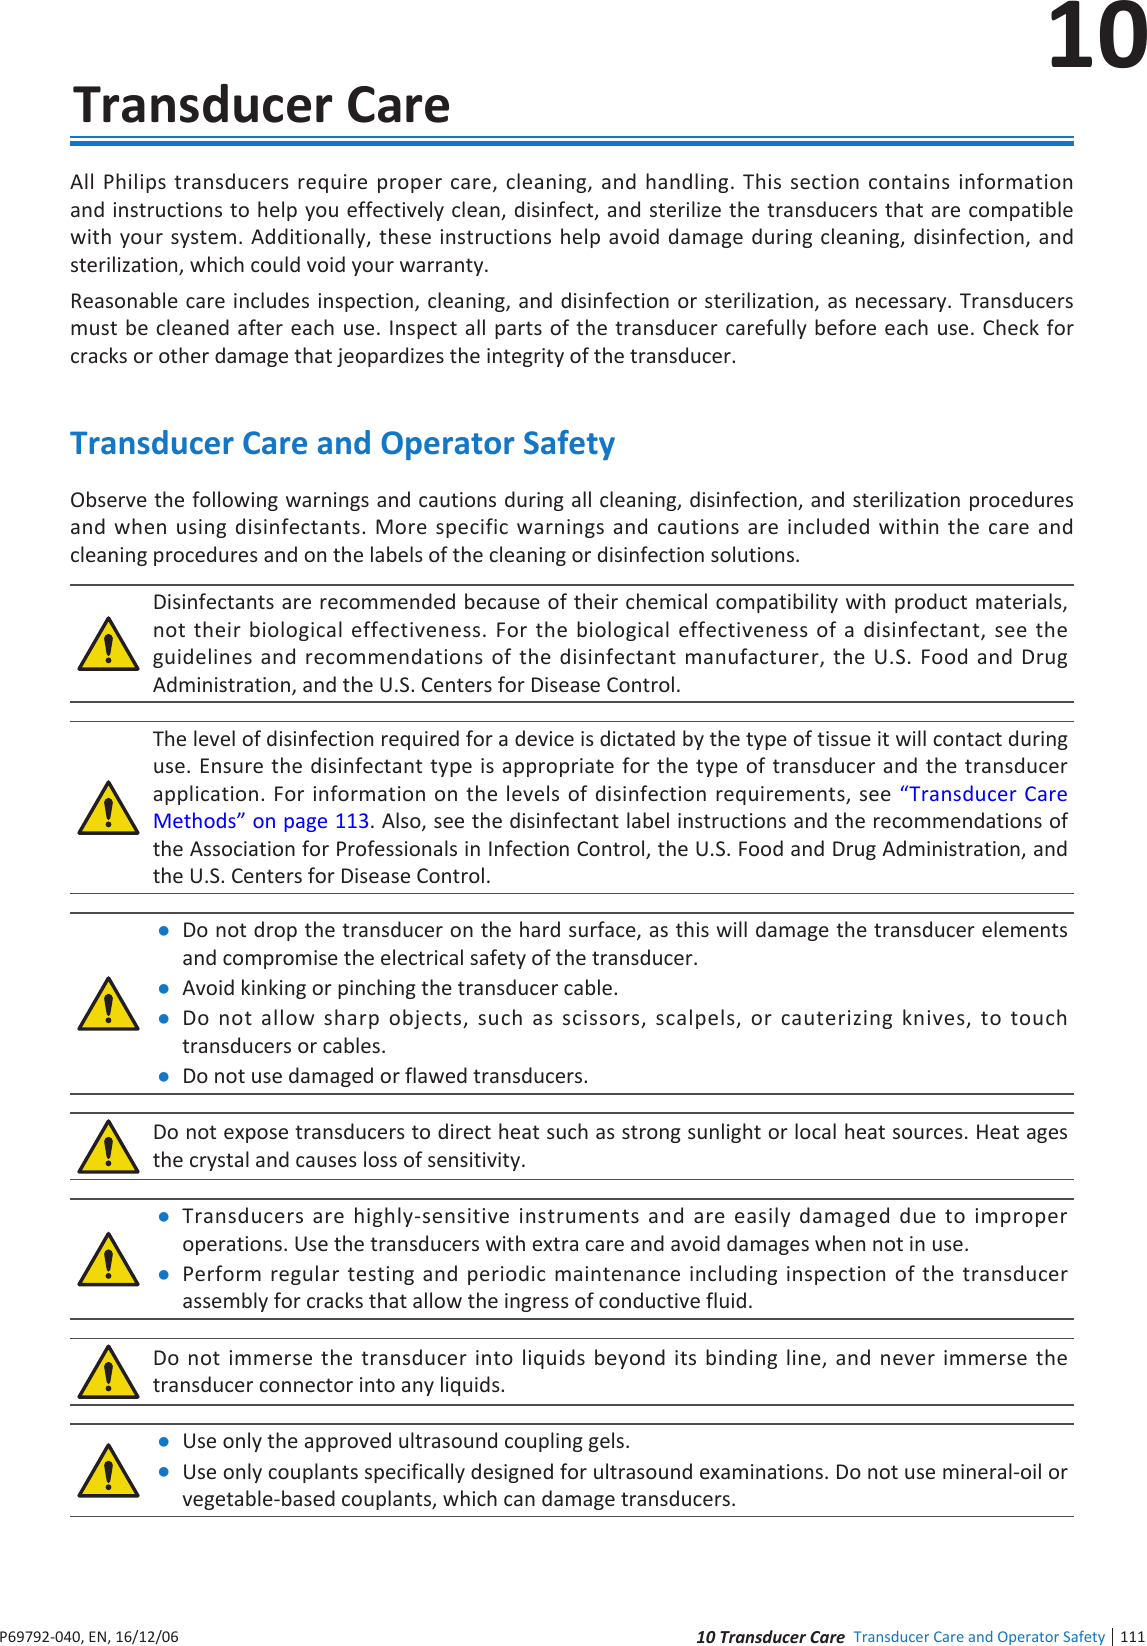 1111 ndee Transducer Care and Operator Safety10P6992-4, EN, 16/12/610  Transducer CareAll Philips transducers require proper care, cleaning, and handling This section contains information and instructions to help you effectively clean, disinfect, and sterilize the transducers that are compatible with your system Additionally, these instructions help avoid damage during cleaning, disinfection, and sterilization, which could void your warrantyReasonable care includes inspection, cleaning, and disinfection or sterilization, as necessary Transducers must be cleaned after each use Inspect all parts of the transducer carefully before each use Check for cracks or other damage that jeopardizes the integrity of the transducerTransducer Care and Operator SafetyObserve the following warnings and cautions during all cleaning, disinfection, and sterilization procedures and when using disinfectants More specific warnings and cautions are included within the care and cleaning procedures and on the labels of the cleaning or disinfection solutionsDisinfectants are recommended because of their chemical compatibility with product materials, not their biological effectiveness For the biological effectiveness of a disinfectant, see the guidelines and recommendations of the disinfectant manufacturer, the US Food and Drug Administration, and the US Centers for Disease ControlThe level of disinfection required for a device is dictated by the type of tissue it will contact during use Ensure the disinfectant type is appropriate for the type of transducer and the transducer application For information on the levels of disinfection requirements, see Transducer Care Methods on page 113 Also, see the disinfectant label instructions and the recommendations of the Association for Professionals in Infection Control, the US Food and Drug Administration, and the US Centers for Disease Control Do not drop the transducer on the hard surface, as this will damage the transducer elements and compromise the electrical safety of the transducer Avoid kinking or pinching the transducer cable Do not allow sharp objects, such as scissors, scalpels, or cauterizing knives, to touch transducers or cables Do not use damaged or flawed transducersDo not expose transducers to direct heat such as strong sunlight or local heat sources Heat ages the crystal and causes loss of sensitivity Transducers are highly-sensitive instruments and are easily damaged due to improper operations Use the transducers with extra care and avoid damages when not in use Perform regular testing and periodic maintenance including inspection of the transducer assembly for cracks that allow the ingress of conductive fluidDo not immerse the transducer into liquids beyond its binding line, and never immerse the transducer connector into any liquids Use only the approved ultrasound coupling gels Use only couplants specifically designed for ultrasound examinations Do not use mineral-oil or vegetable-based couplants, which can damage transducers